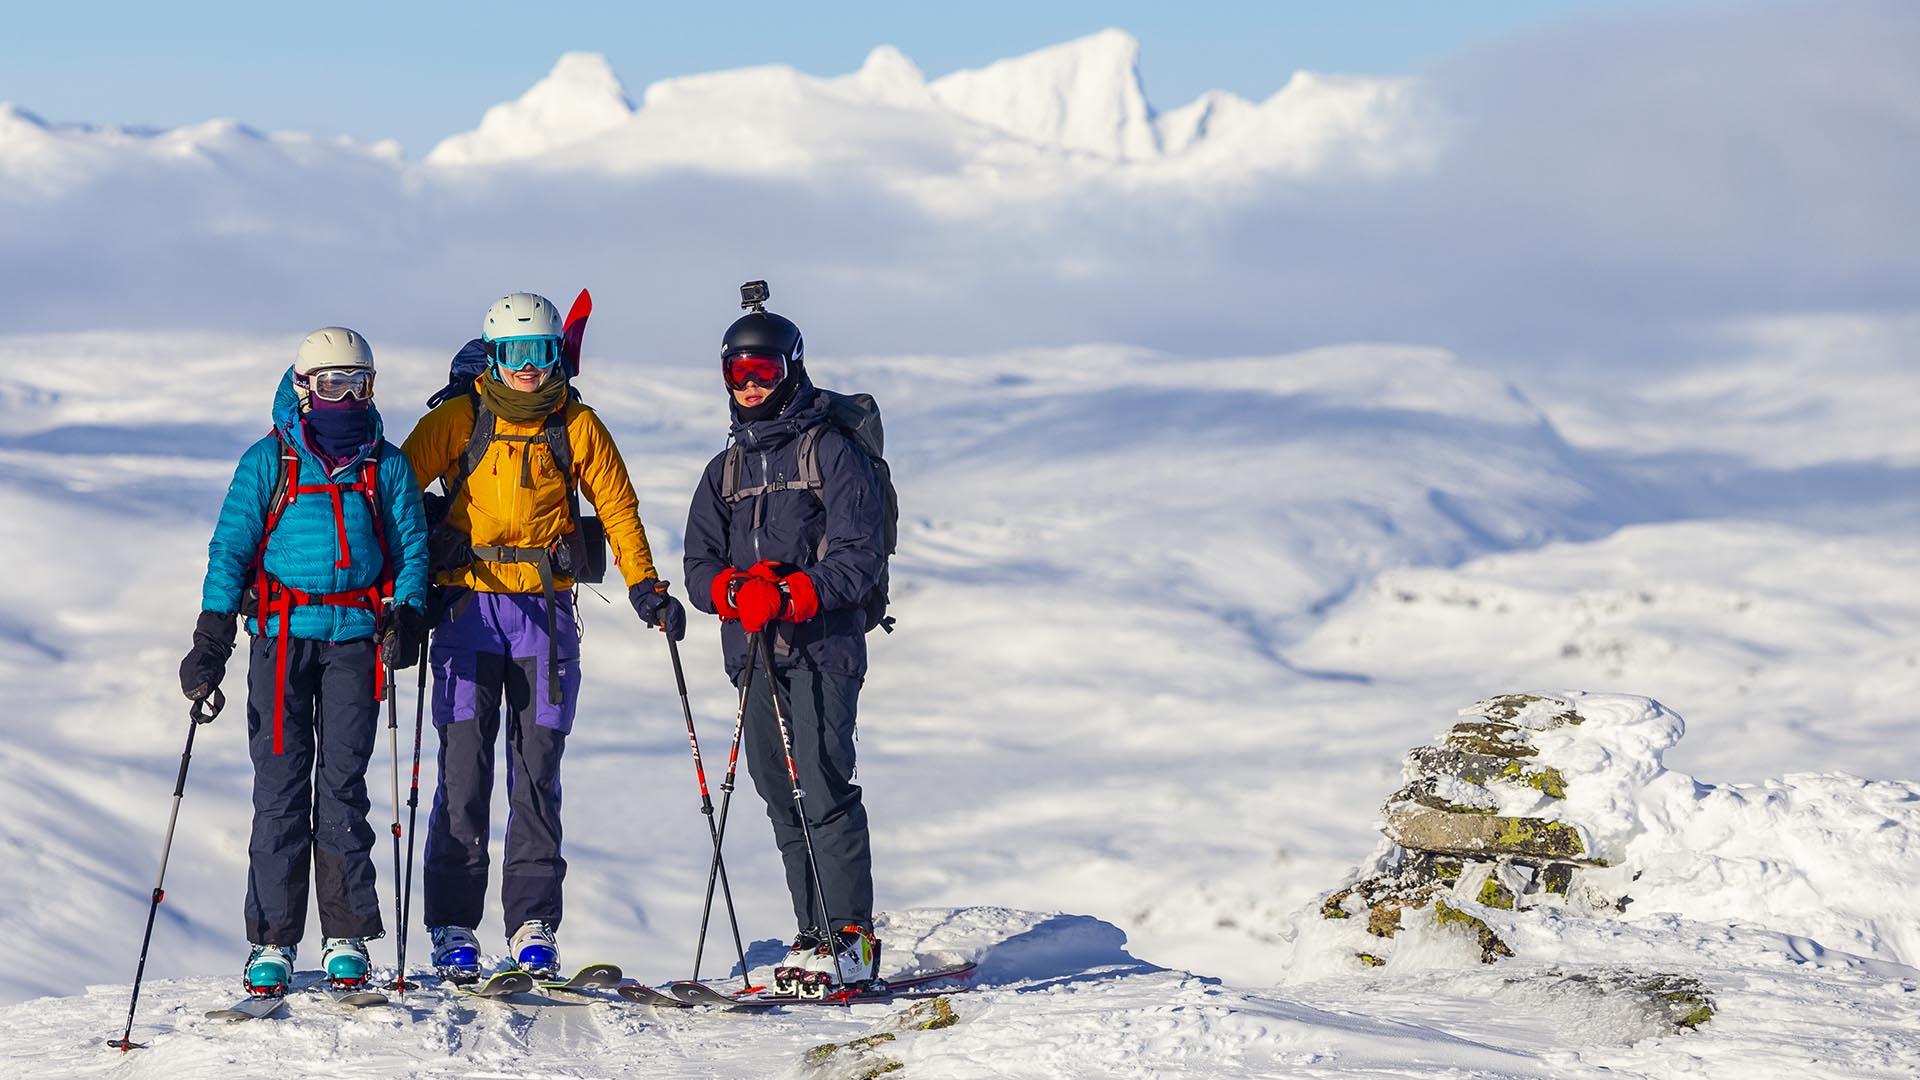 3 persons on top of a mountain with randonee skis, great view over the snow covered mountain landscape.